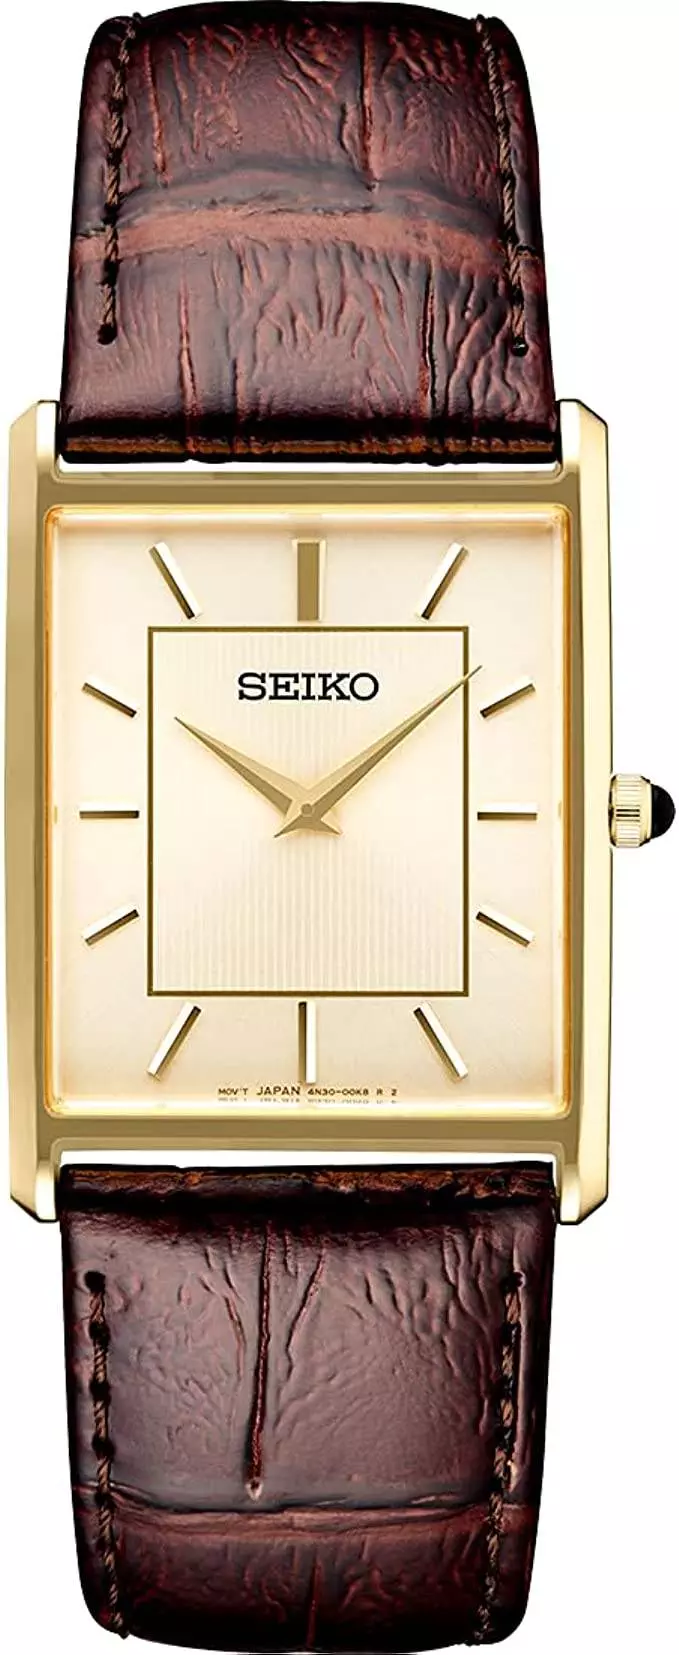 This Seiko Is The Number 1 Most Stylish Watch For Men